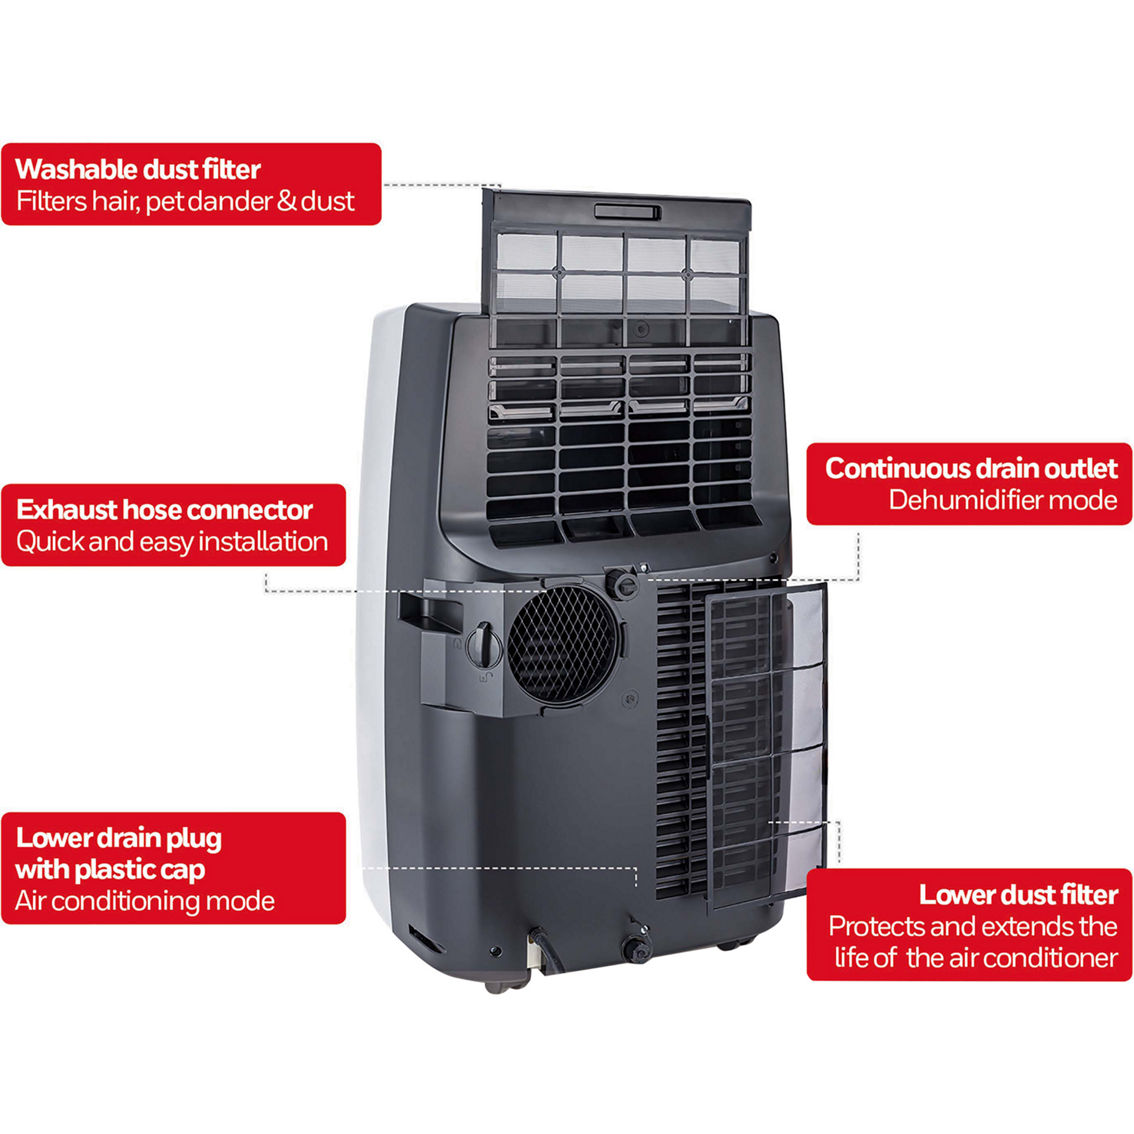 Honeywell 14,000 BTU Heat and Cool Portable Air Conditioner, Dehumidifier and Fan - Image 4 of 9